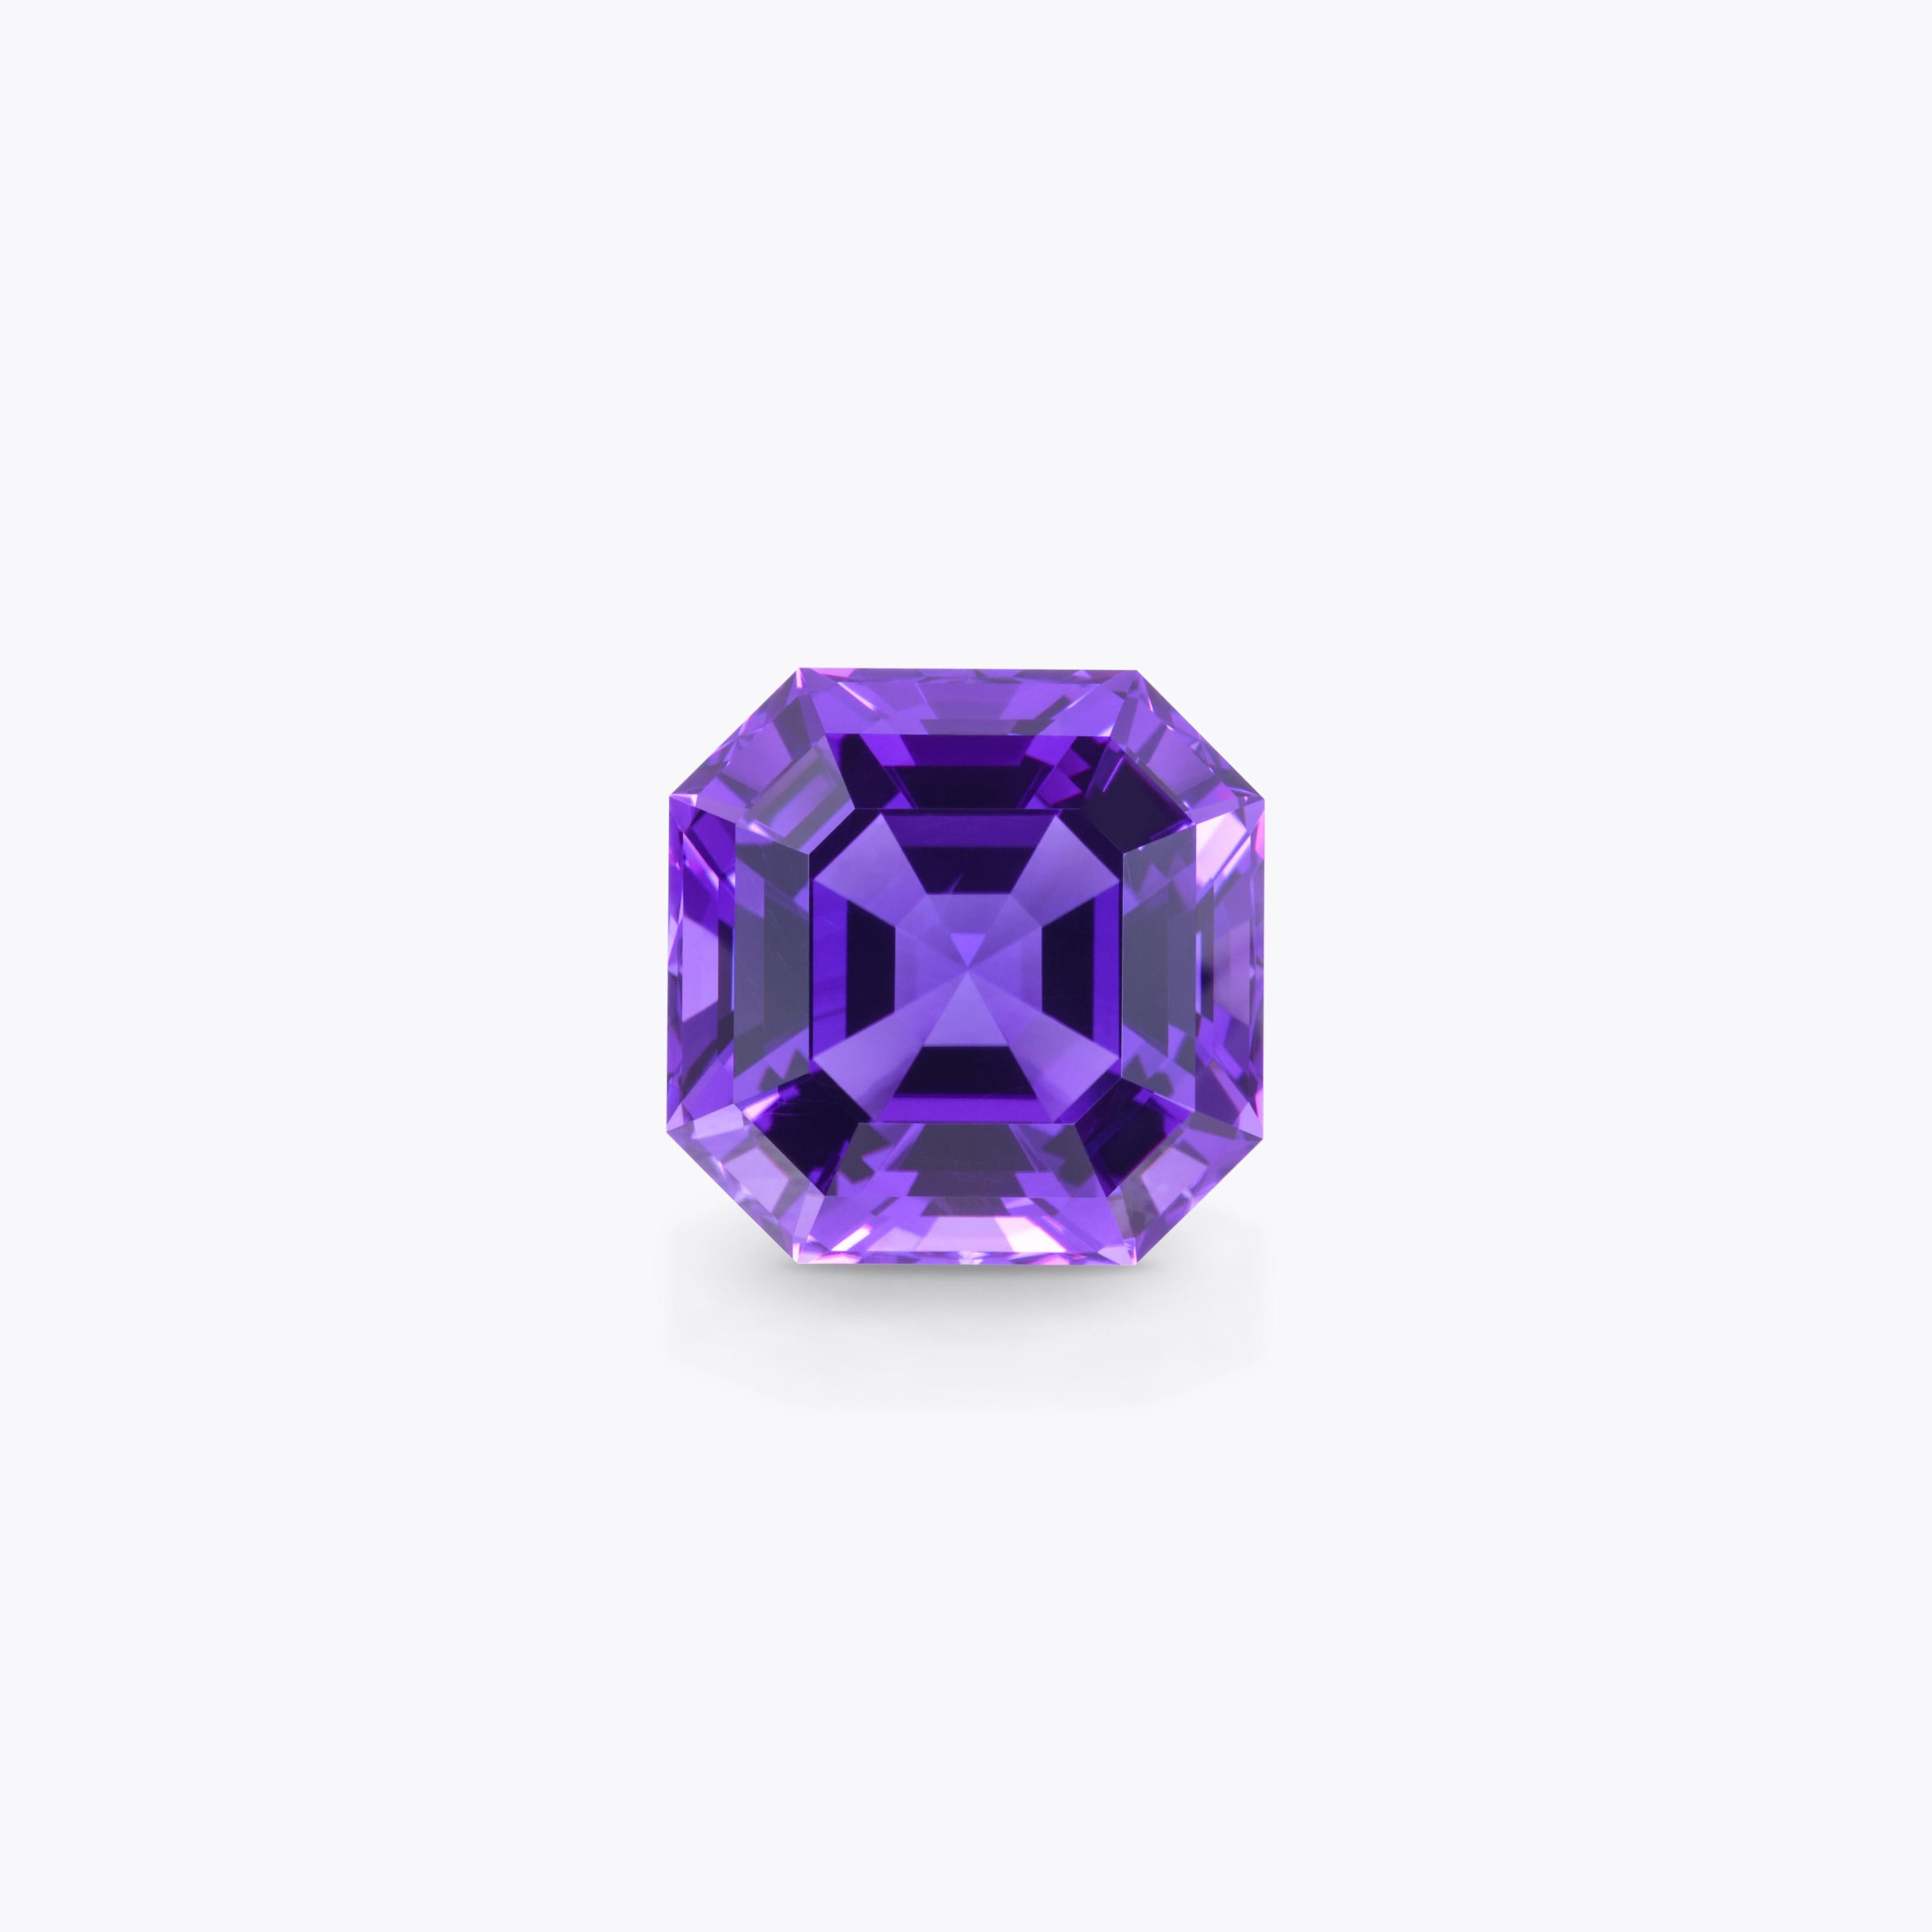 Incredible 83.27 carat Brazilian Amethyst square octagon Asscher cut gem, offered loose to an avid gemstone collector.
Returns are accepted and paid by us within 7 days of delivery.
We offer supreme custom jewelry work upon request. Please contact